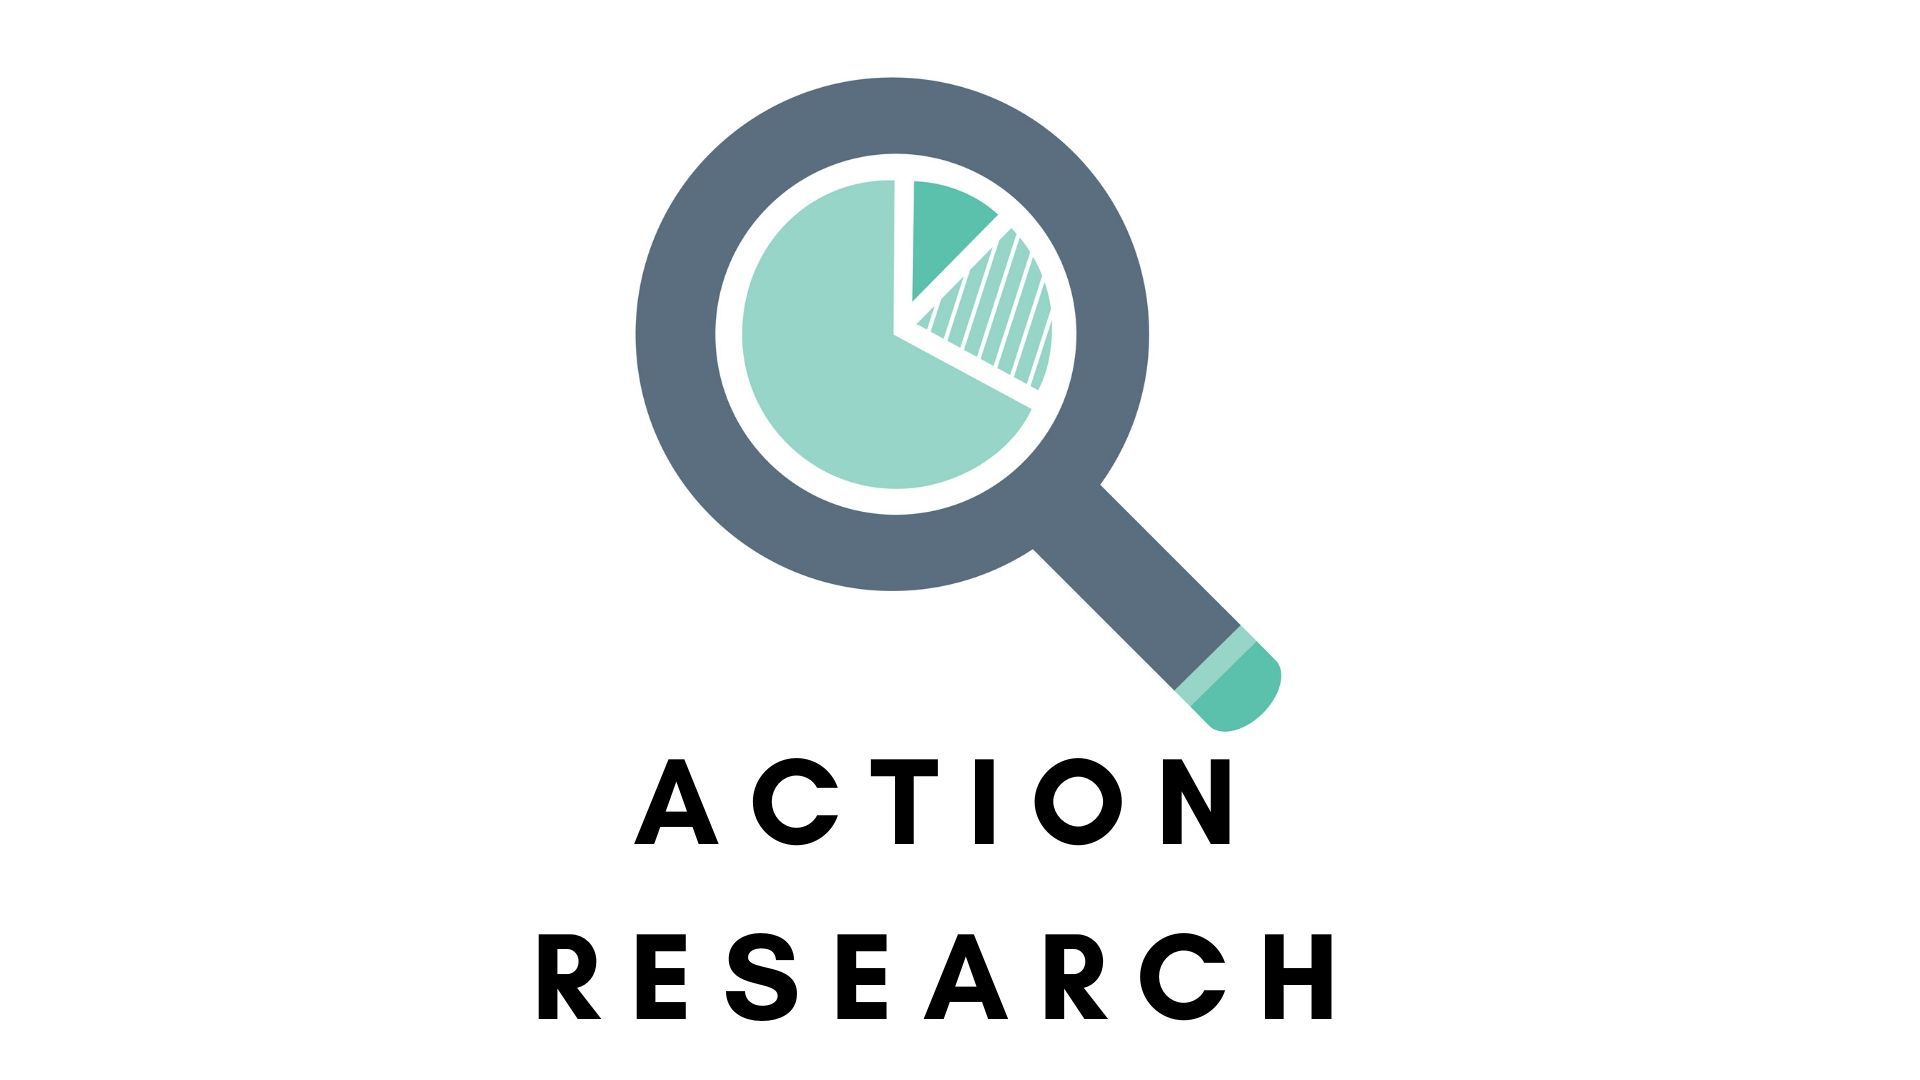 apa in action research